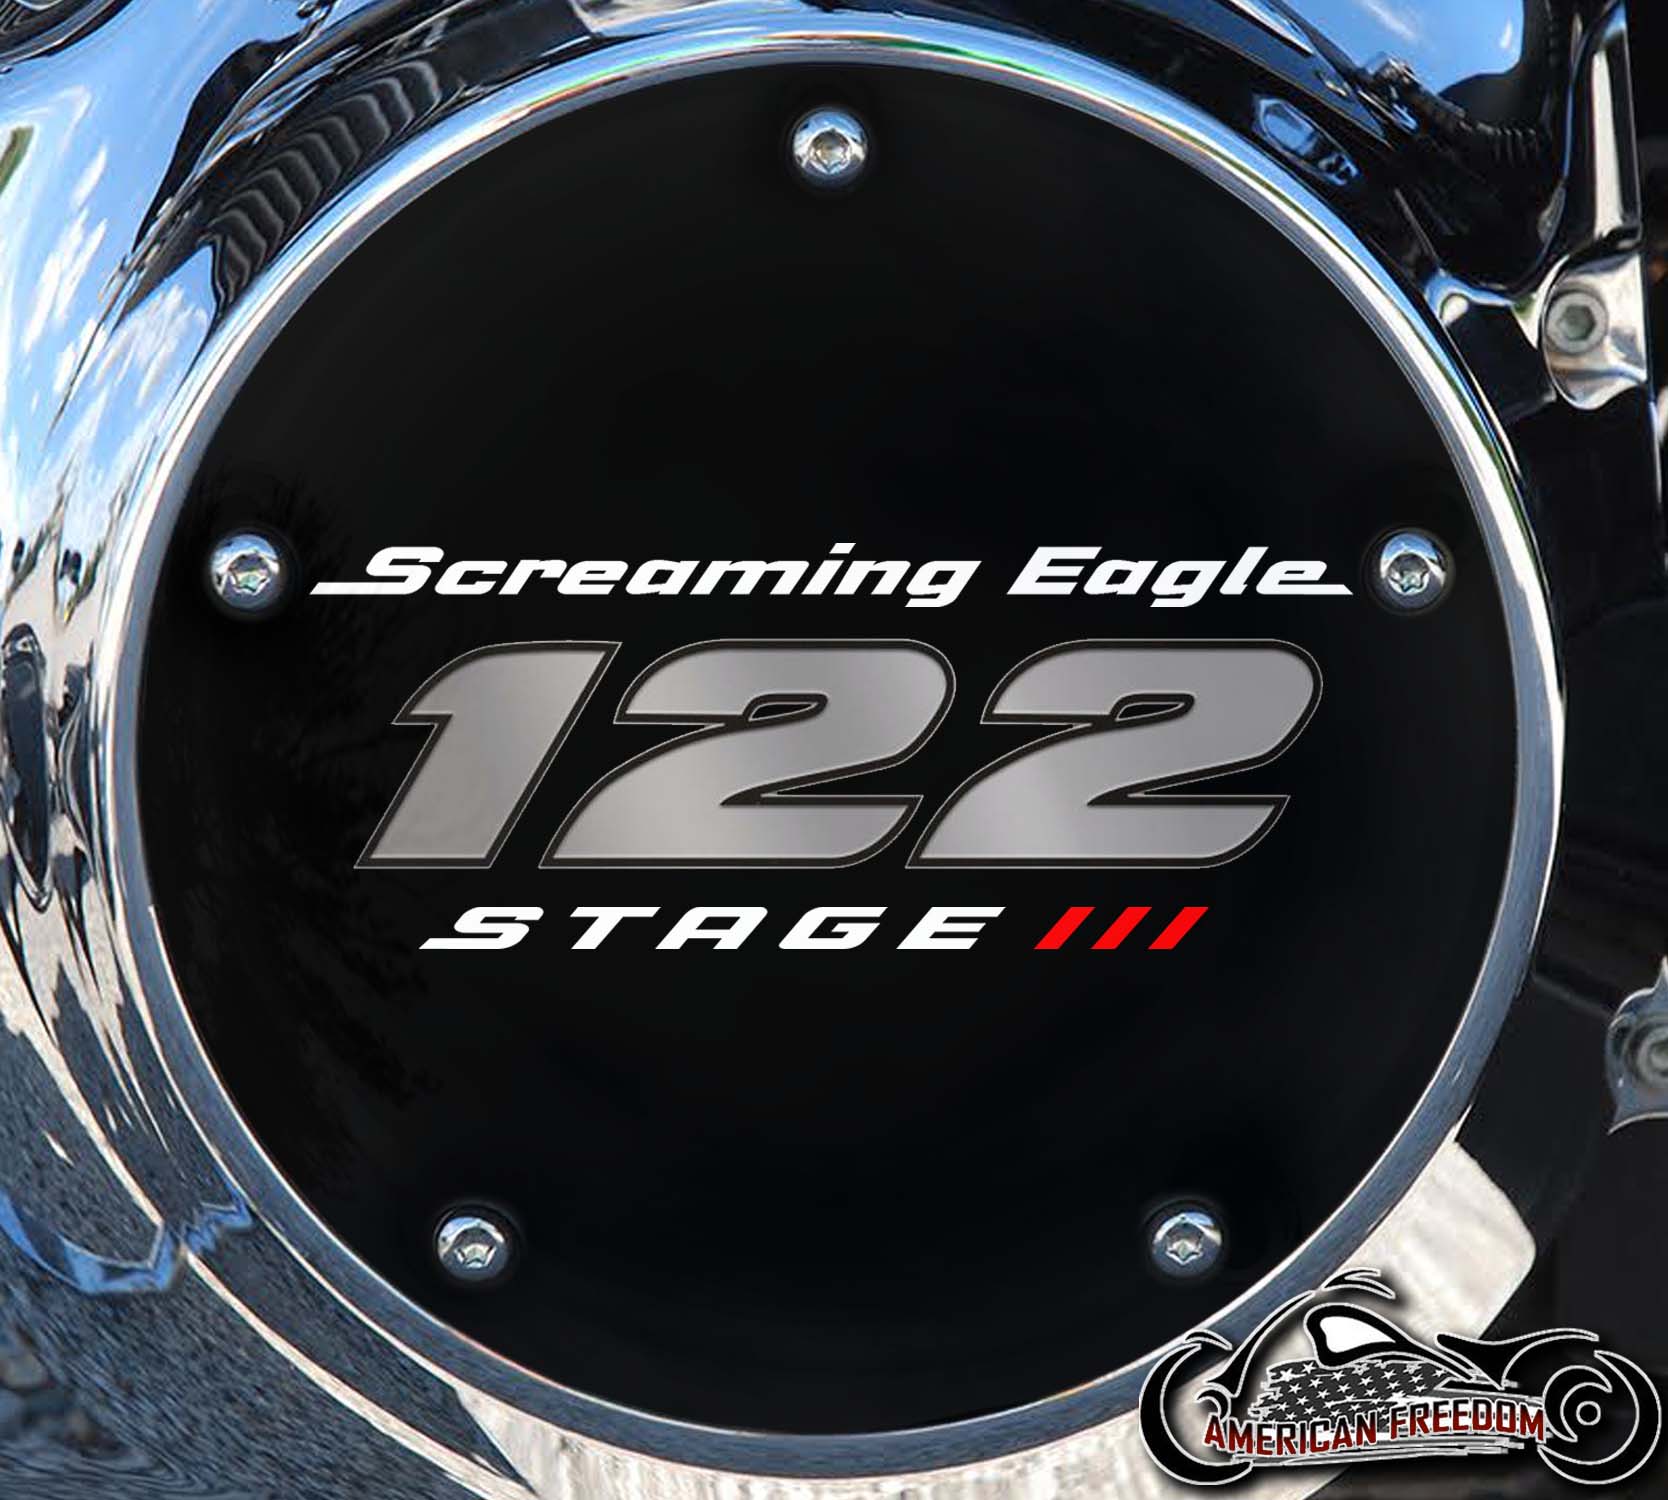 Screaming Eagle Stage III 122 Derby Cover